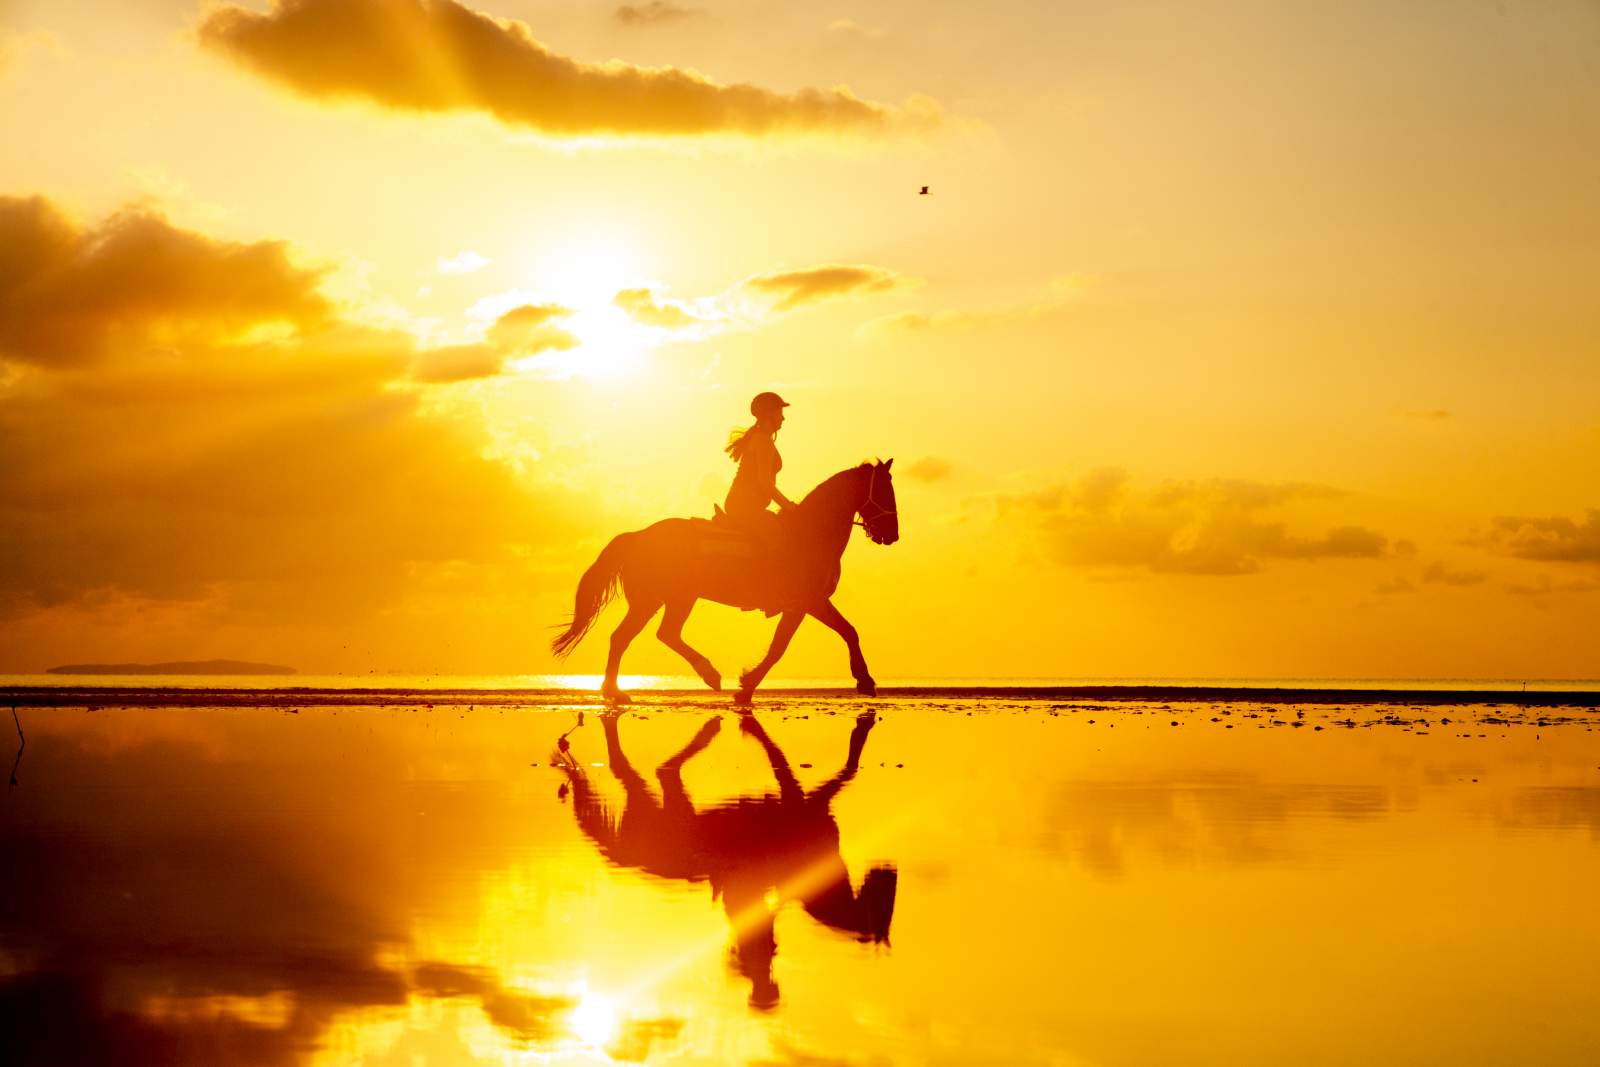 Horse rider with reflection on water at orange sunset